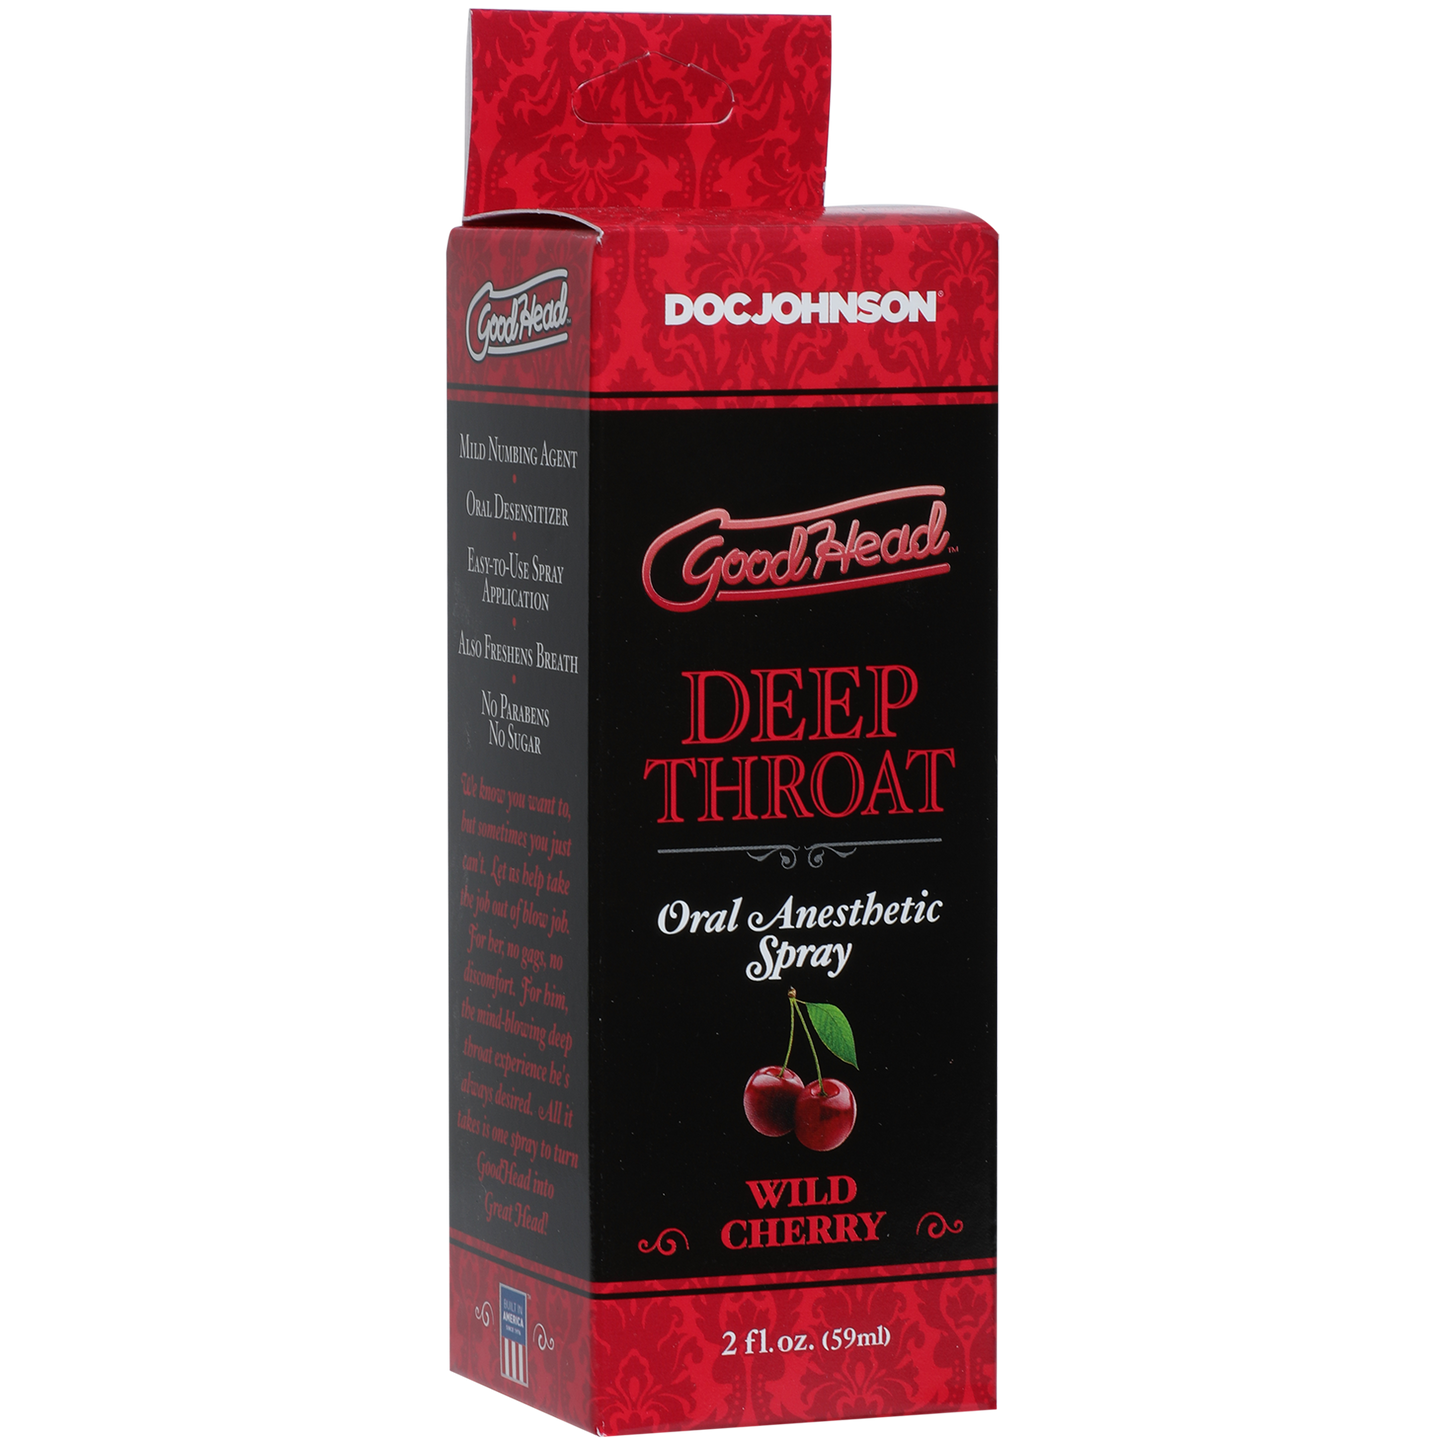 Deep Throat Oral Anesthetic Spray 2oz in its box (cherry).